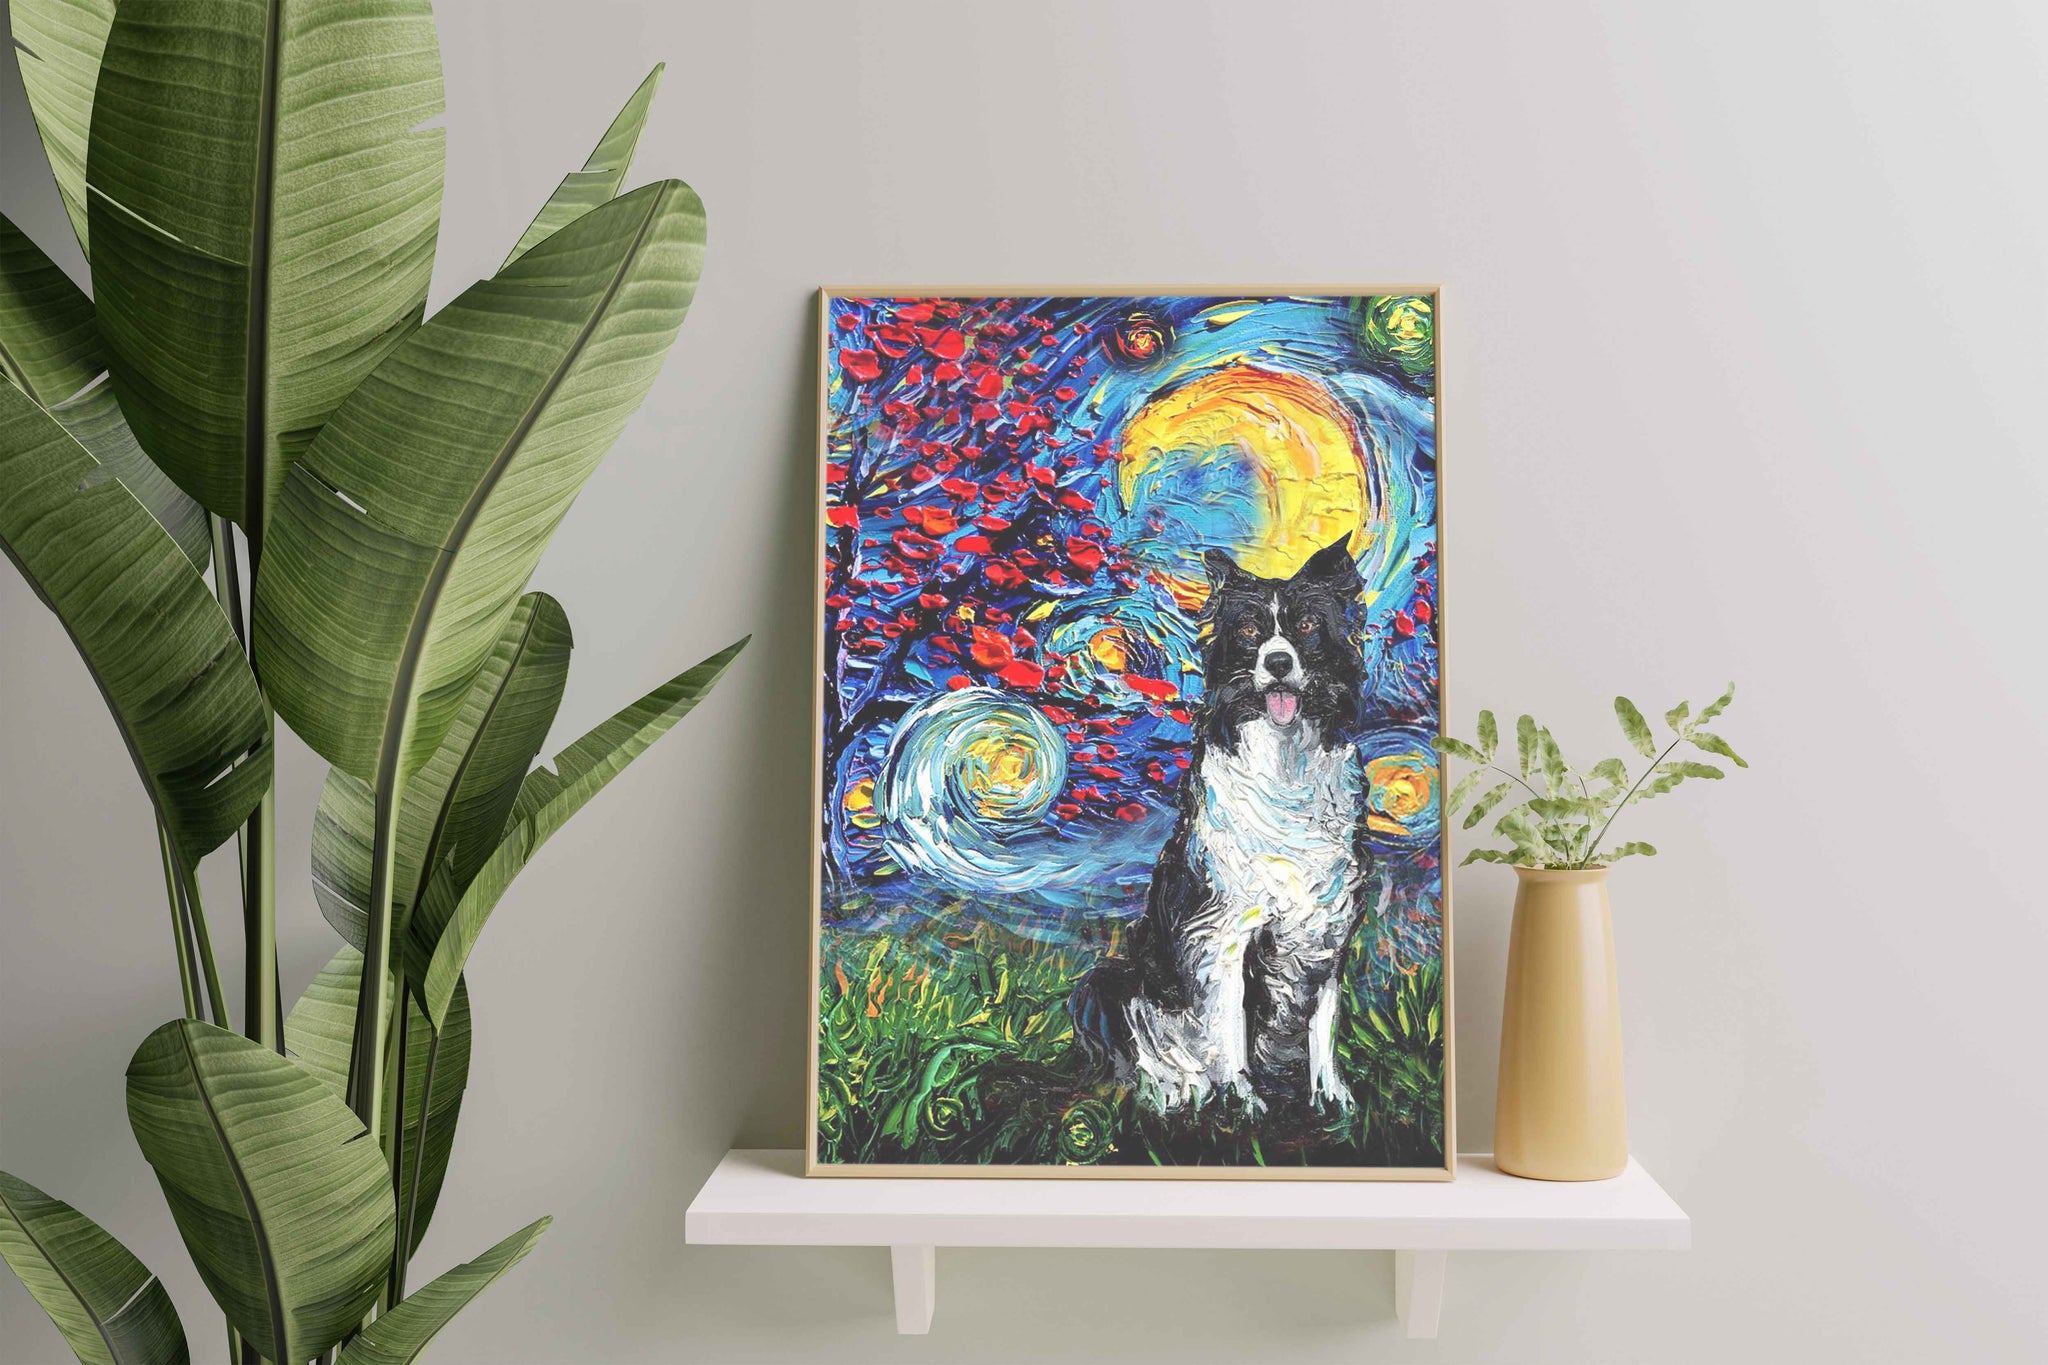 Skitongifts Poster No Frame, Wall Art, Home Decor Border Collie Dog Starry Night Style Halloween-TT1008